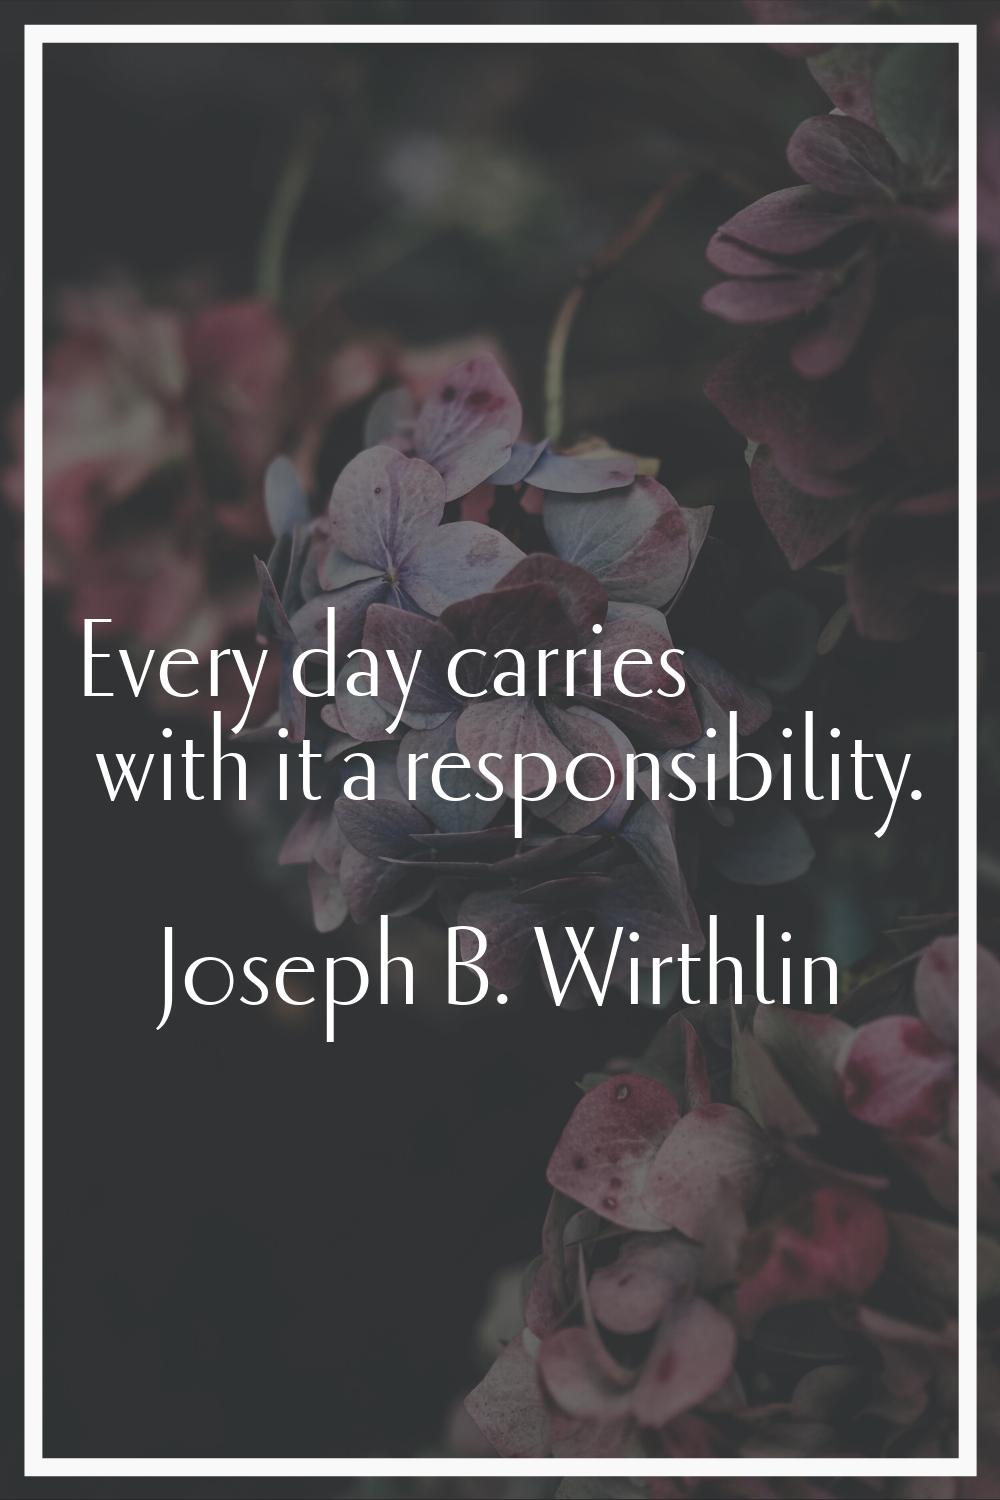 Every day carries with it a responsibility.